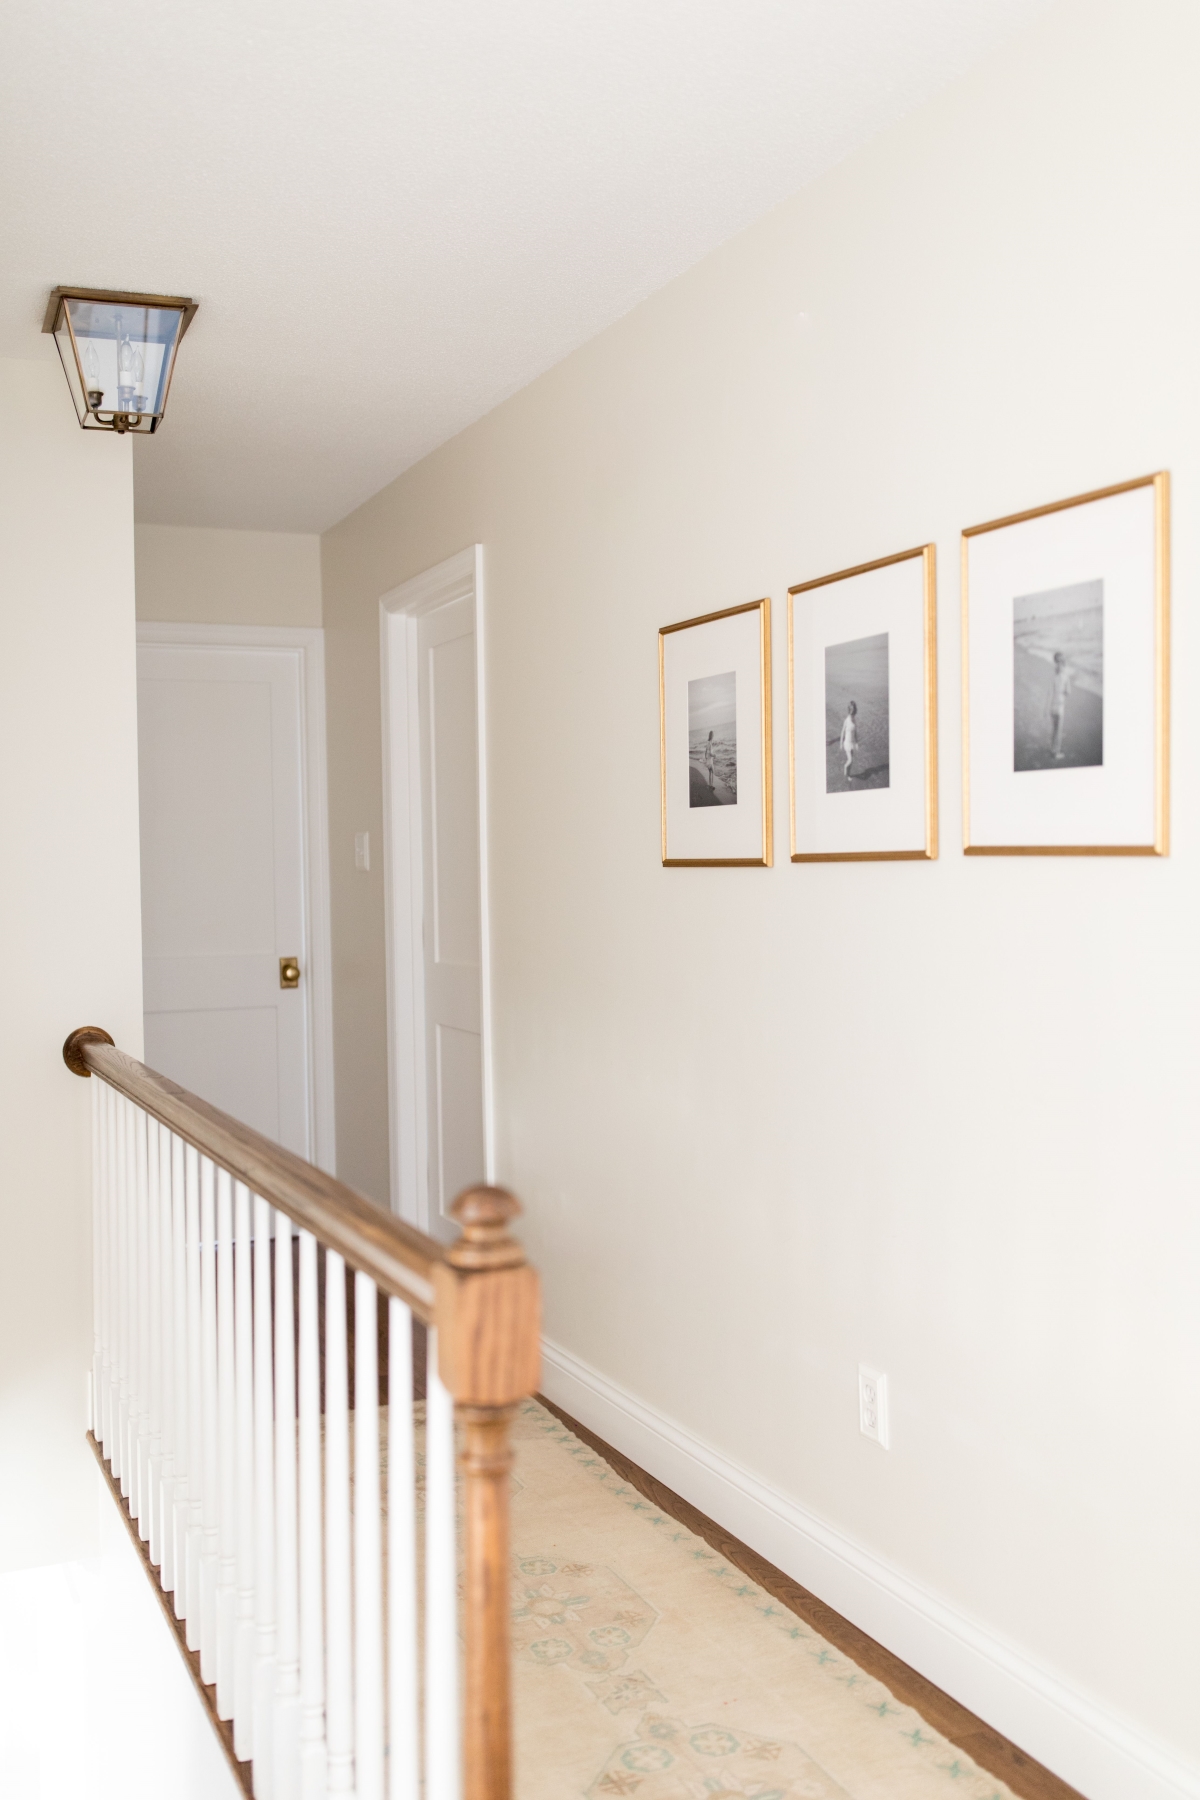 A hallway painted in a cream paint color, with brass framed black and white photos on the wall